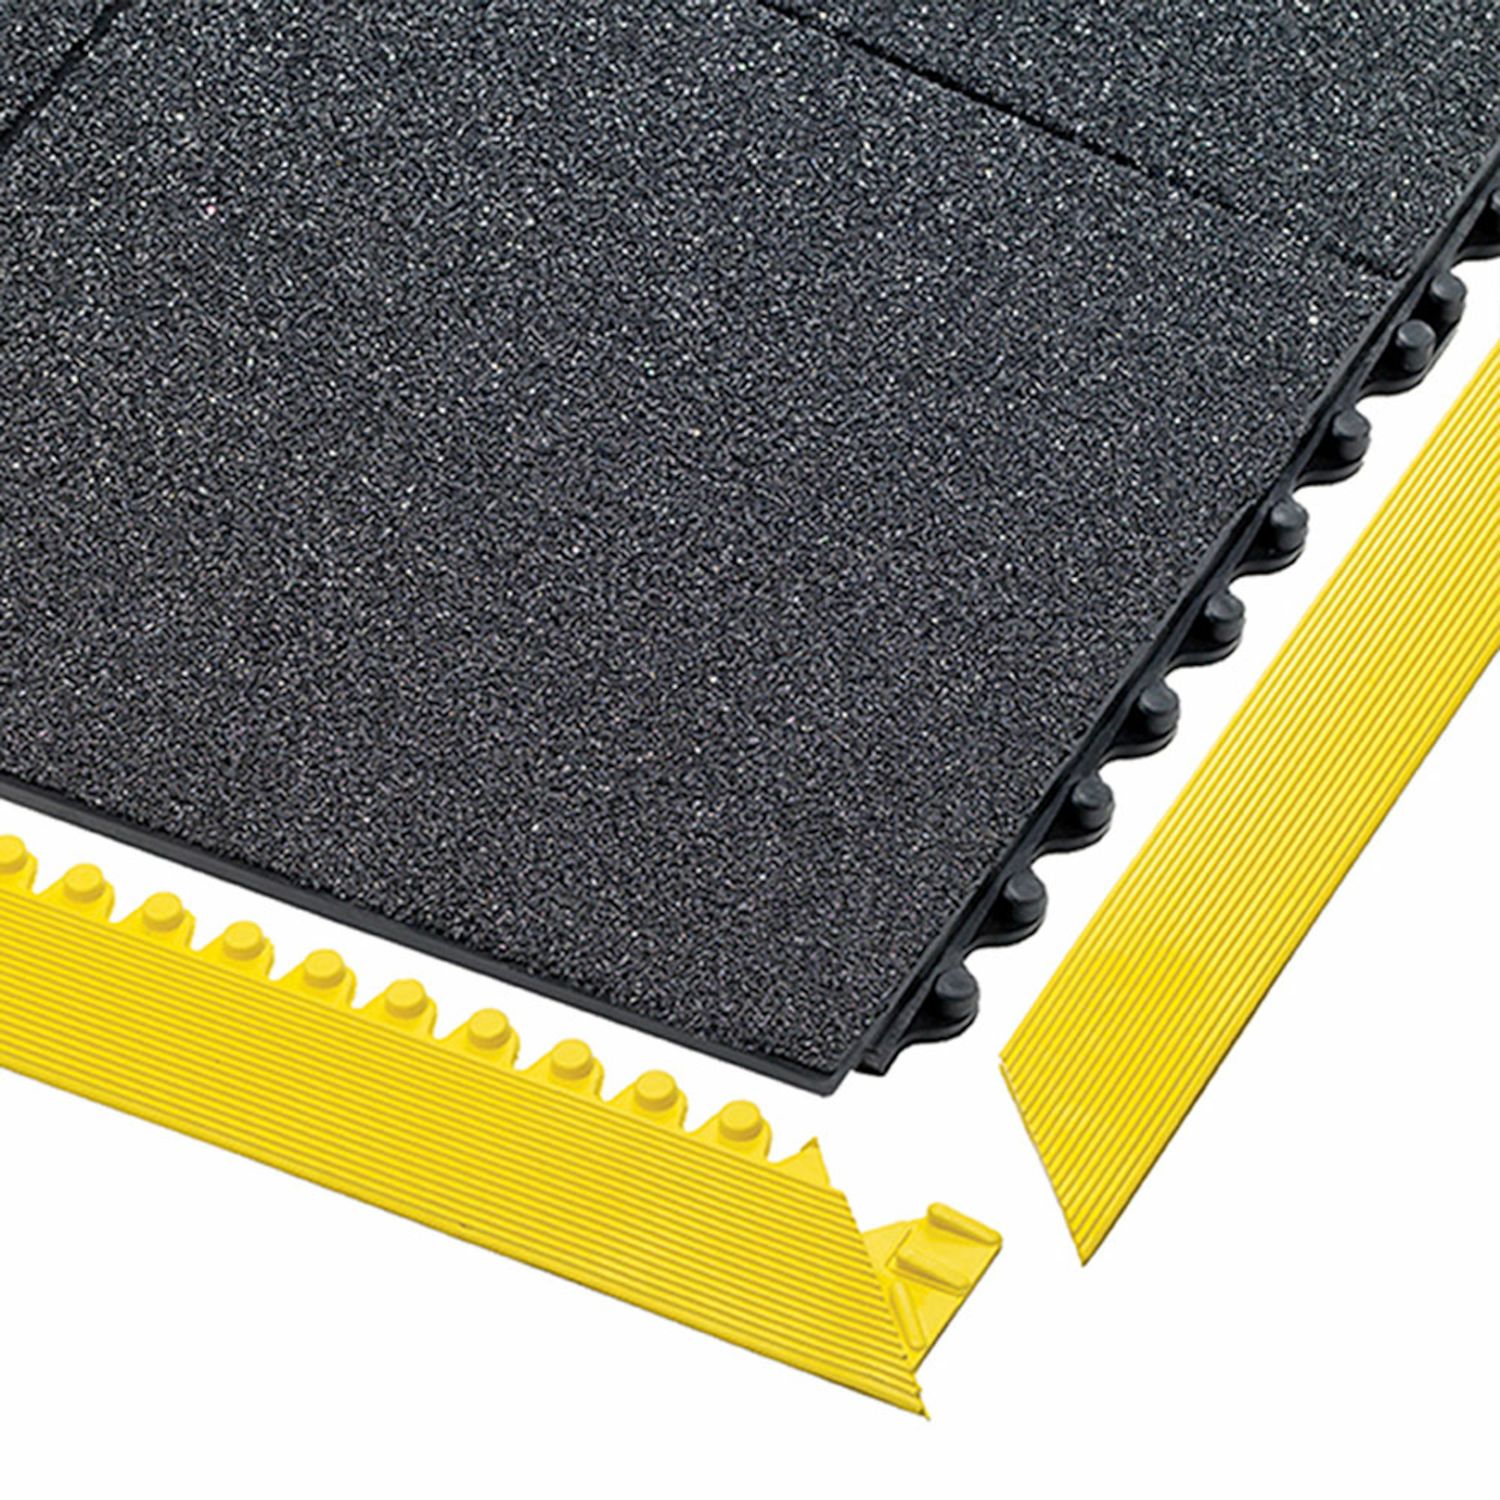 Rubber Heavy Duty Anti Fatigue Mat Safety Grip Non Slip Workplace